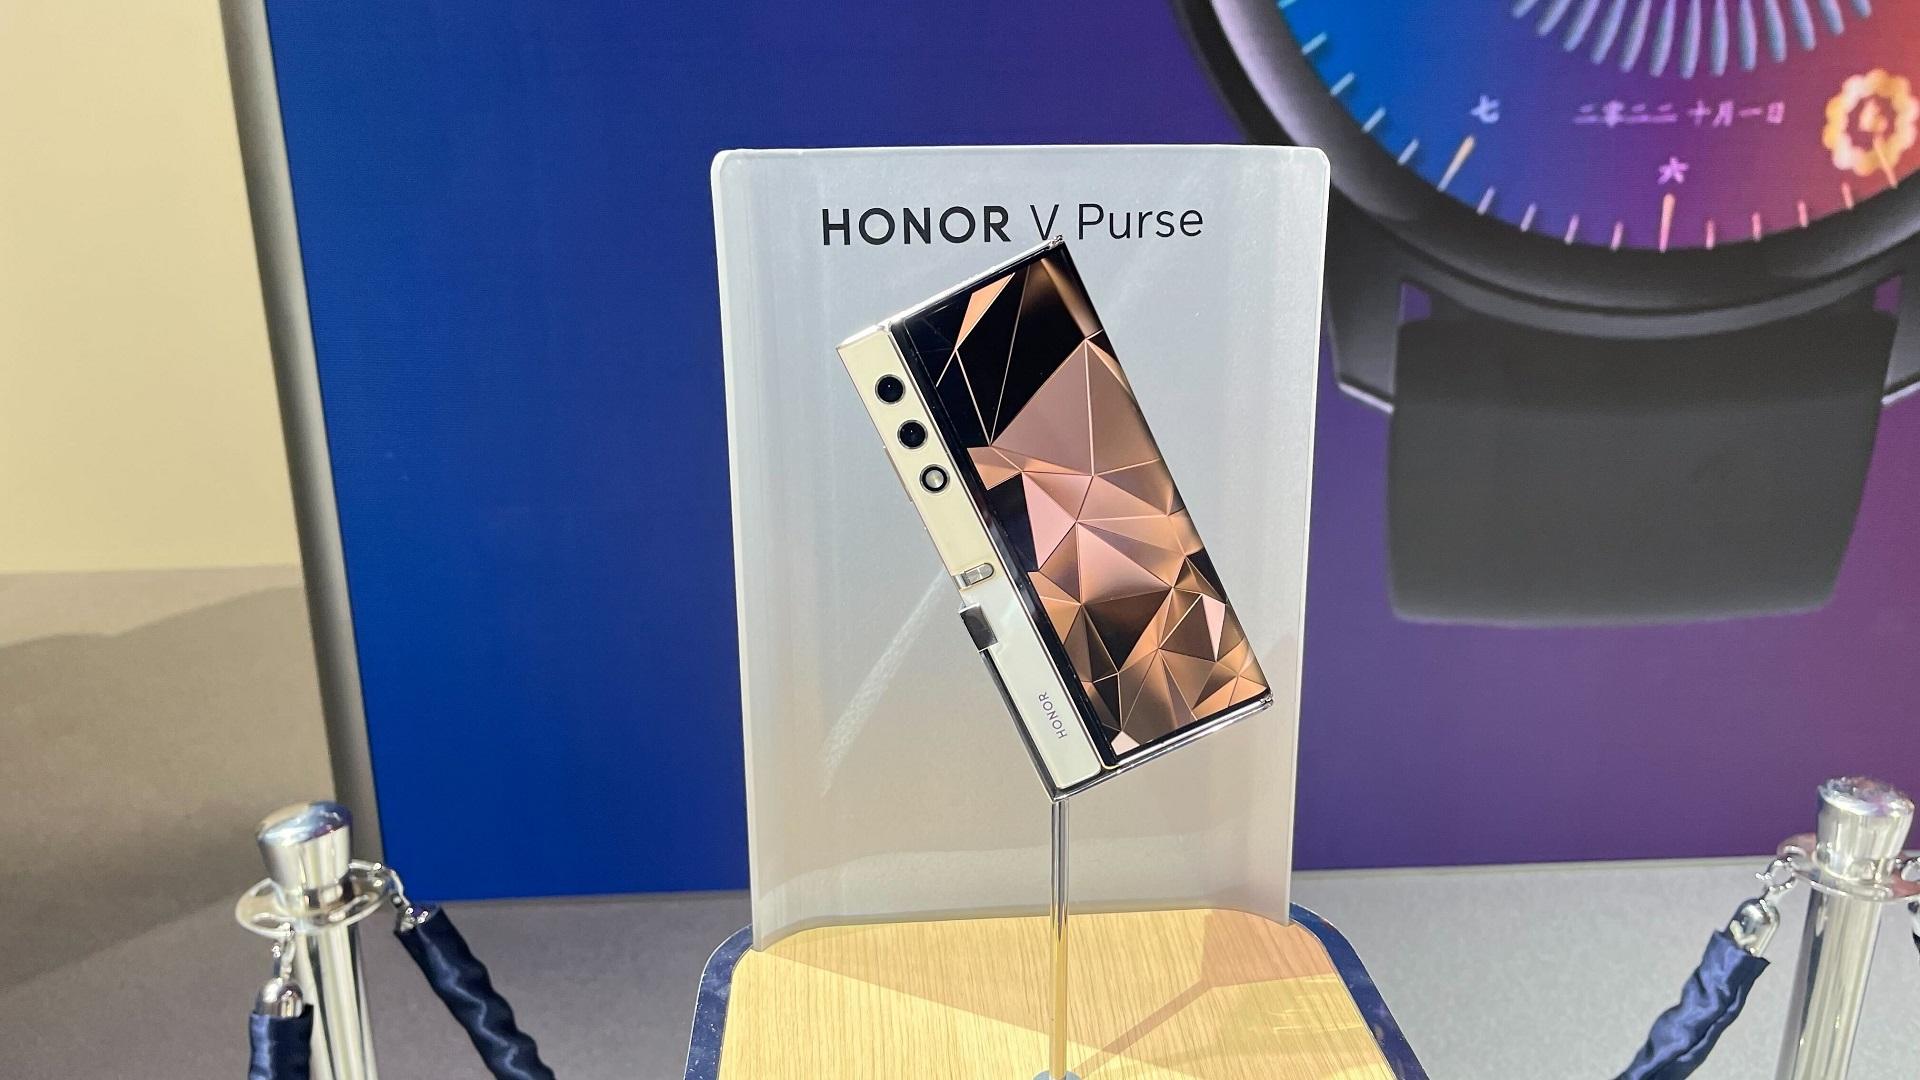 HONOR turns its foldable smartphone into handbag with always-on live  displays at IFA 2023